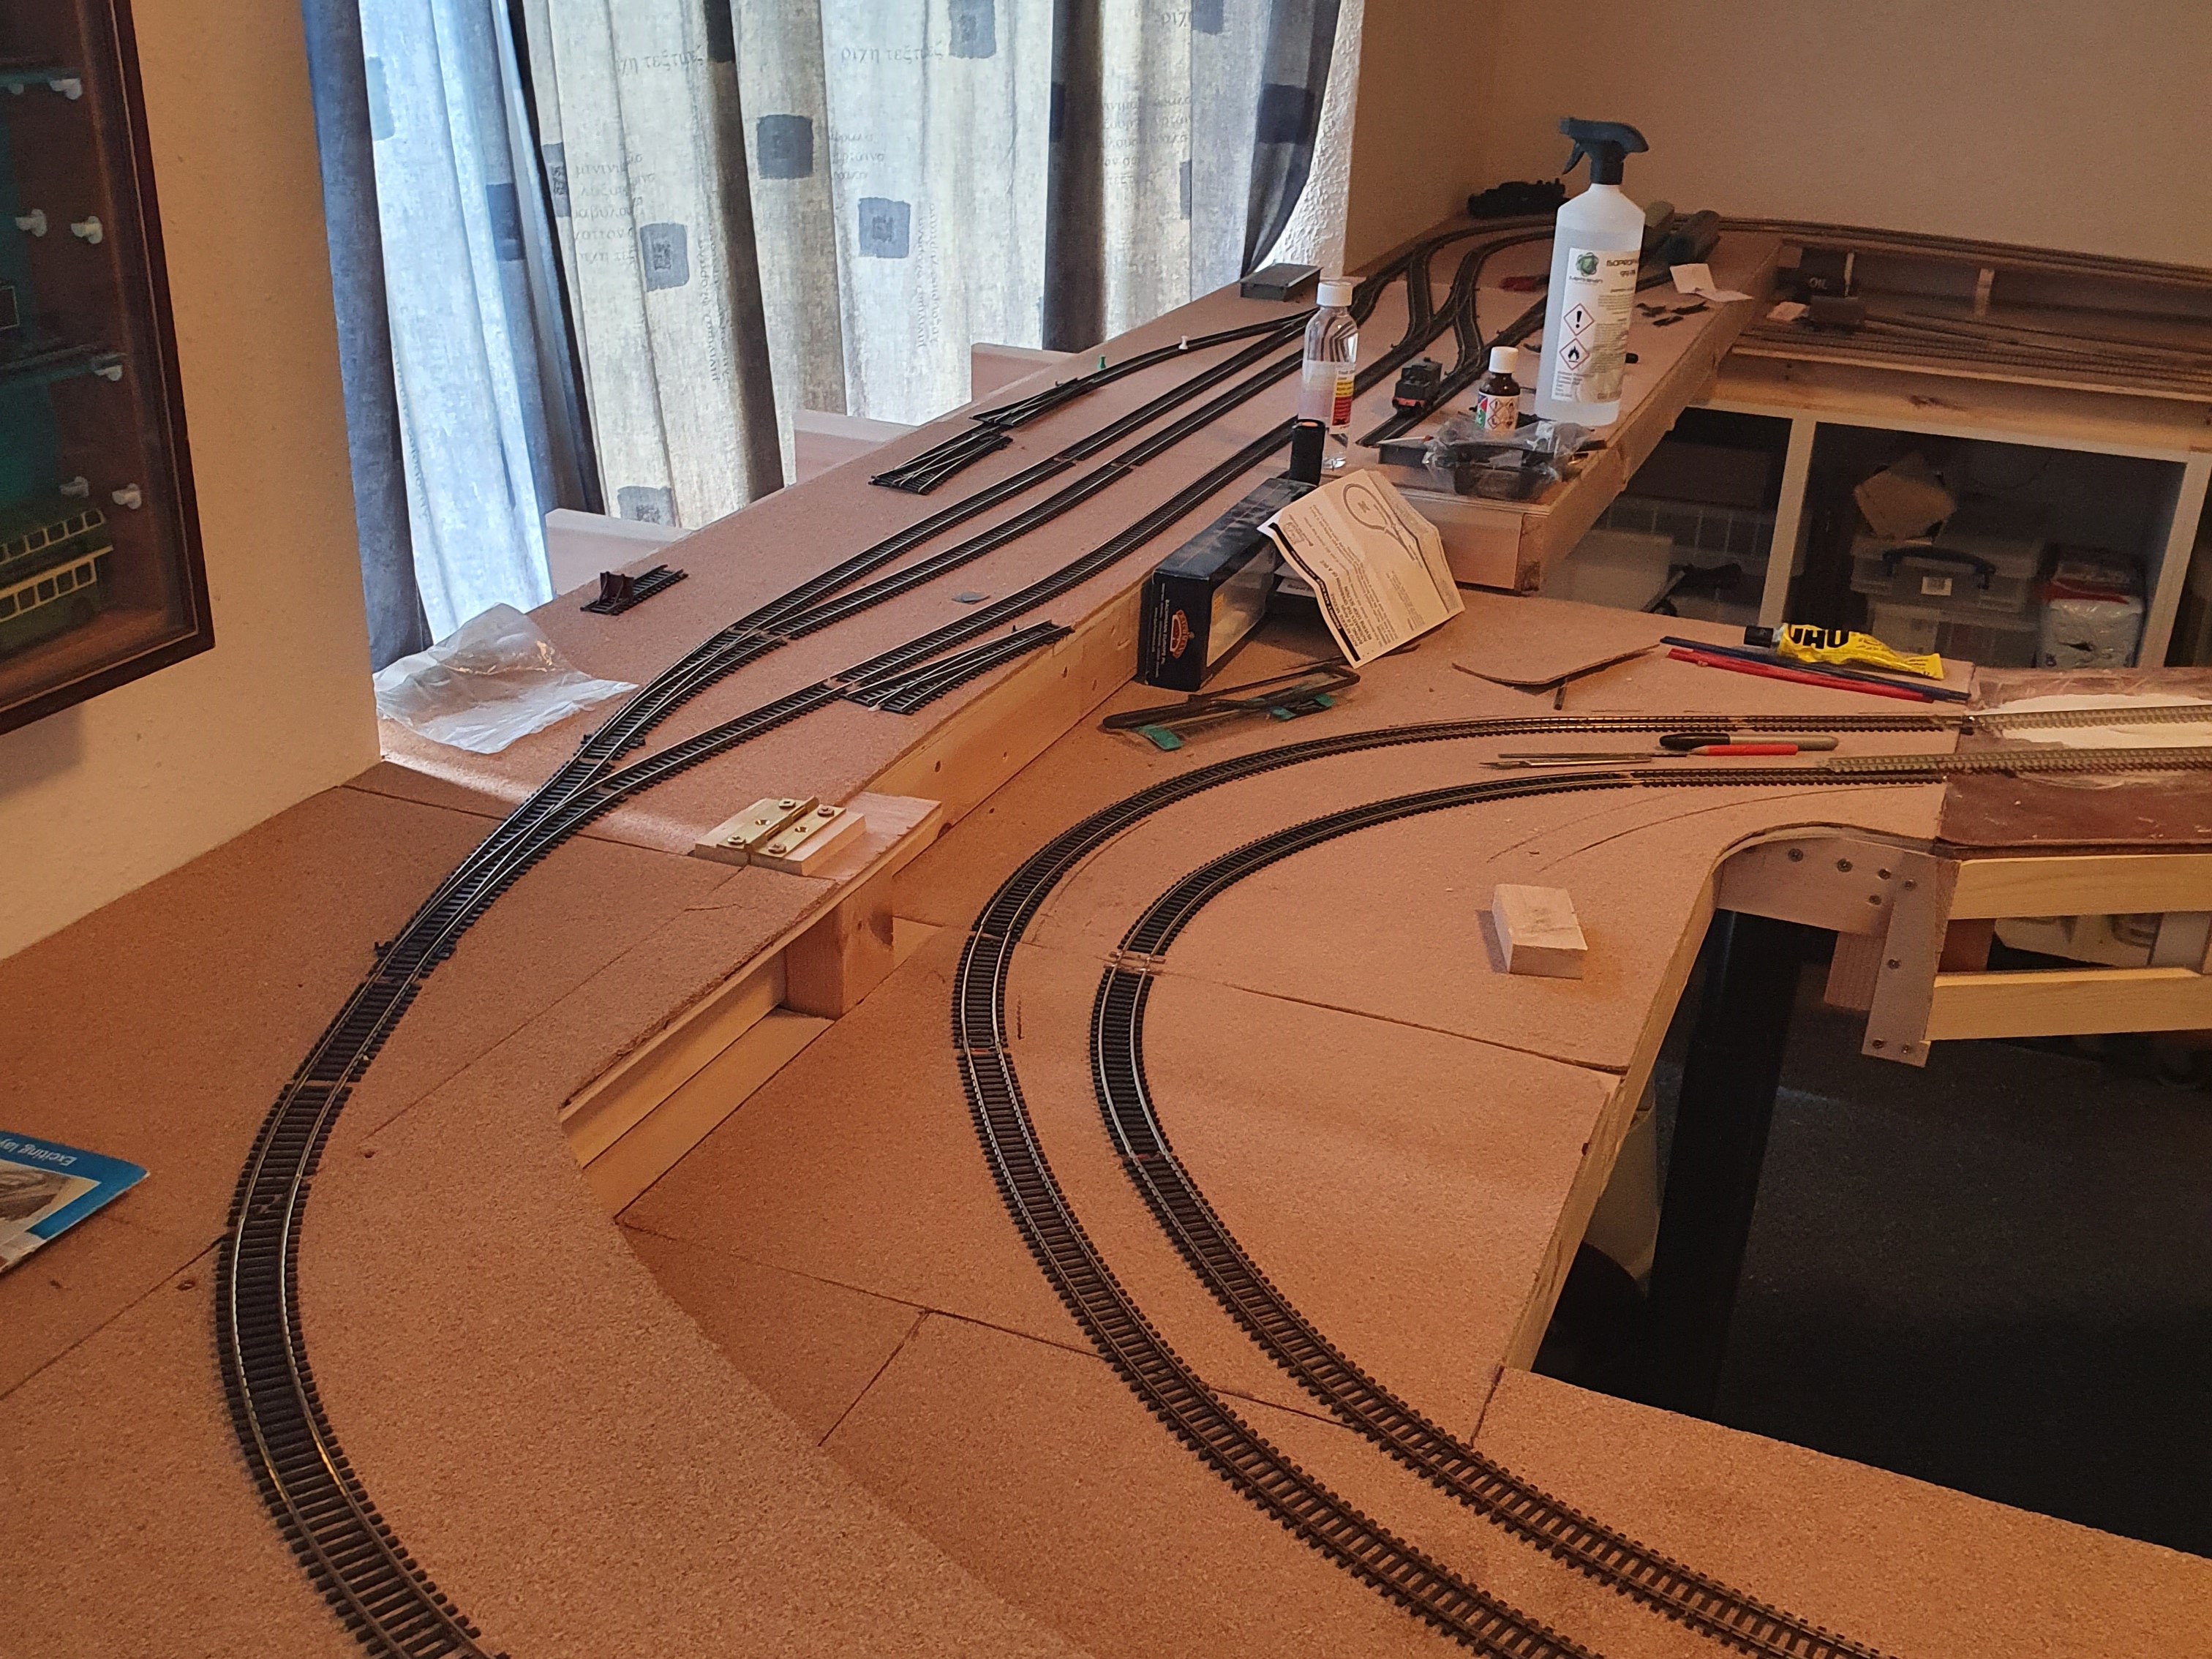 With Baseboard and track